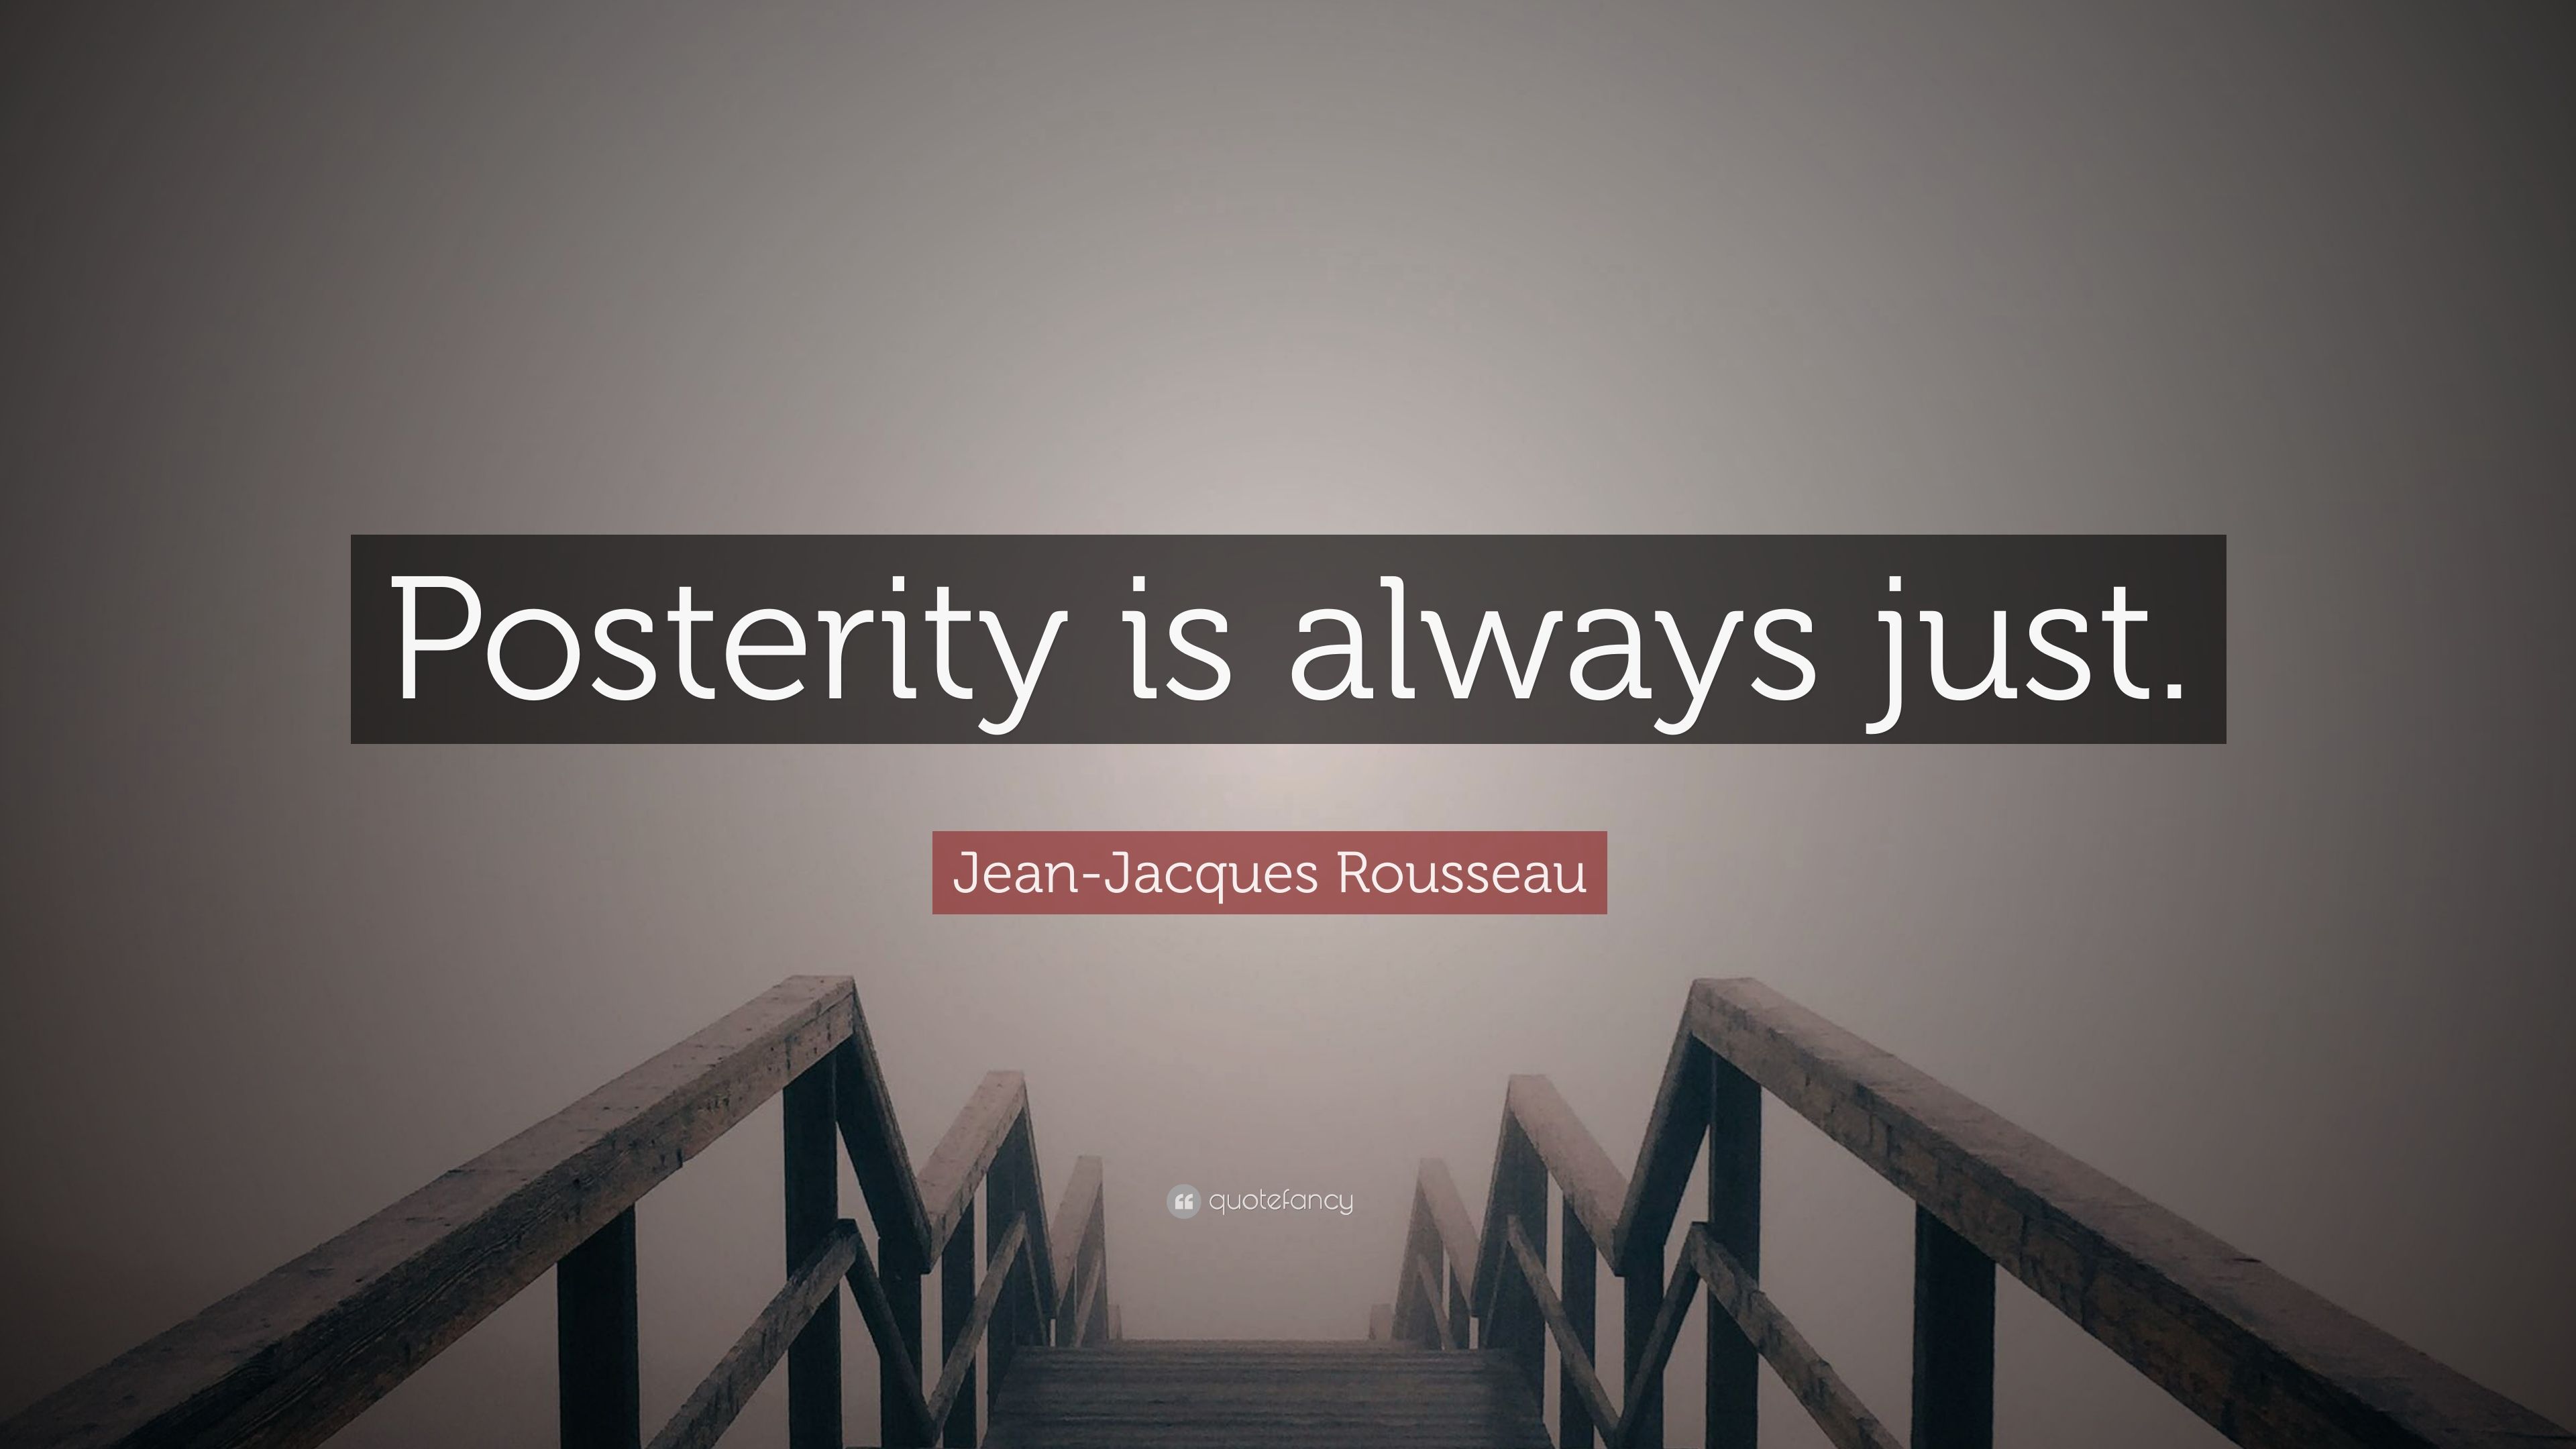 Jean Jacques Rousseau Quote: “Posterity Is Always Just.” (10 Wallpaper)